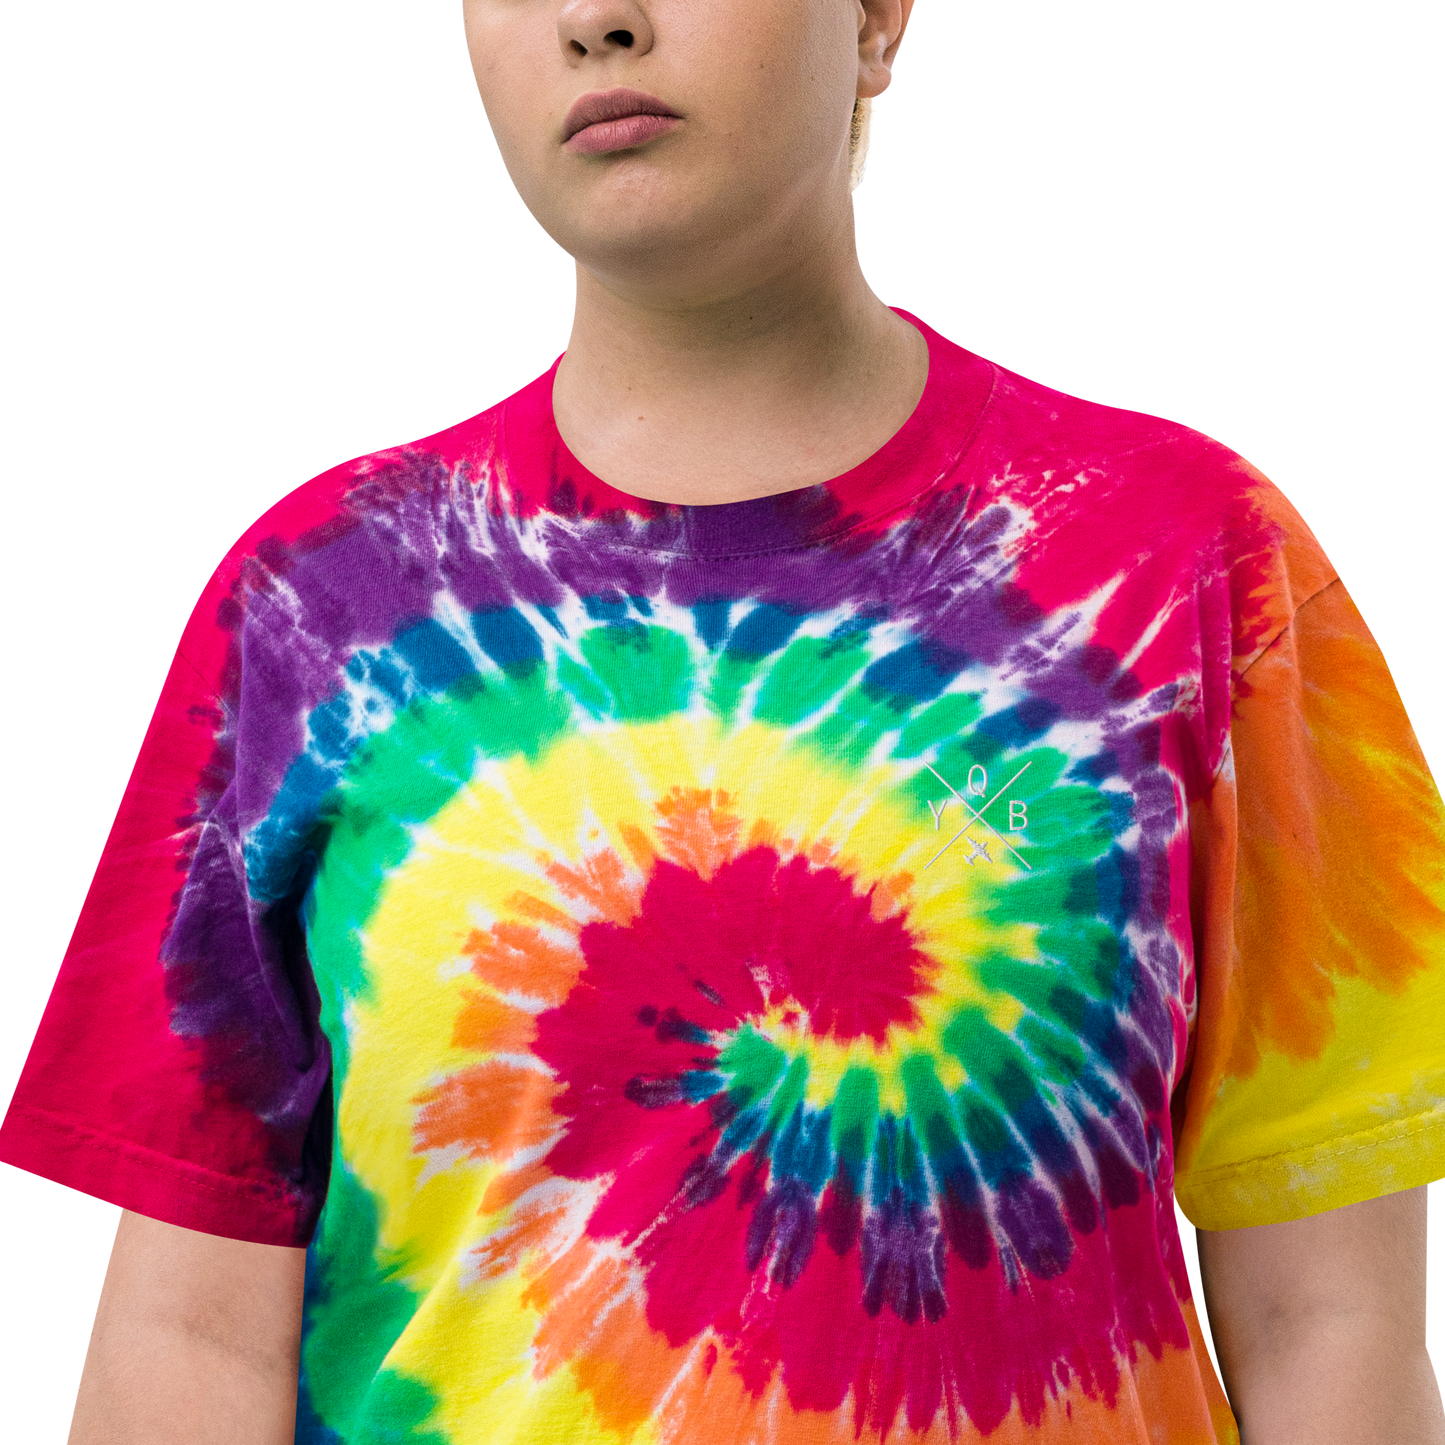 Crossed-X Oversized Tie-Dye T-Shirt • YQB Quebec City • YHM Designs - Image 15